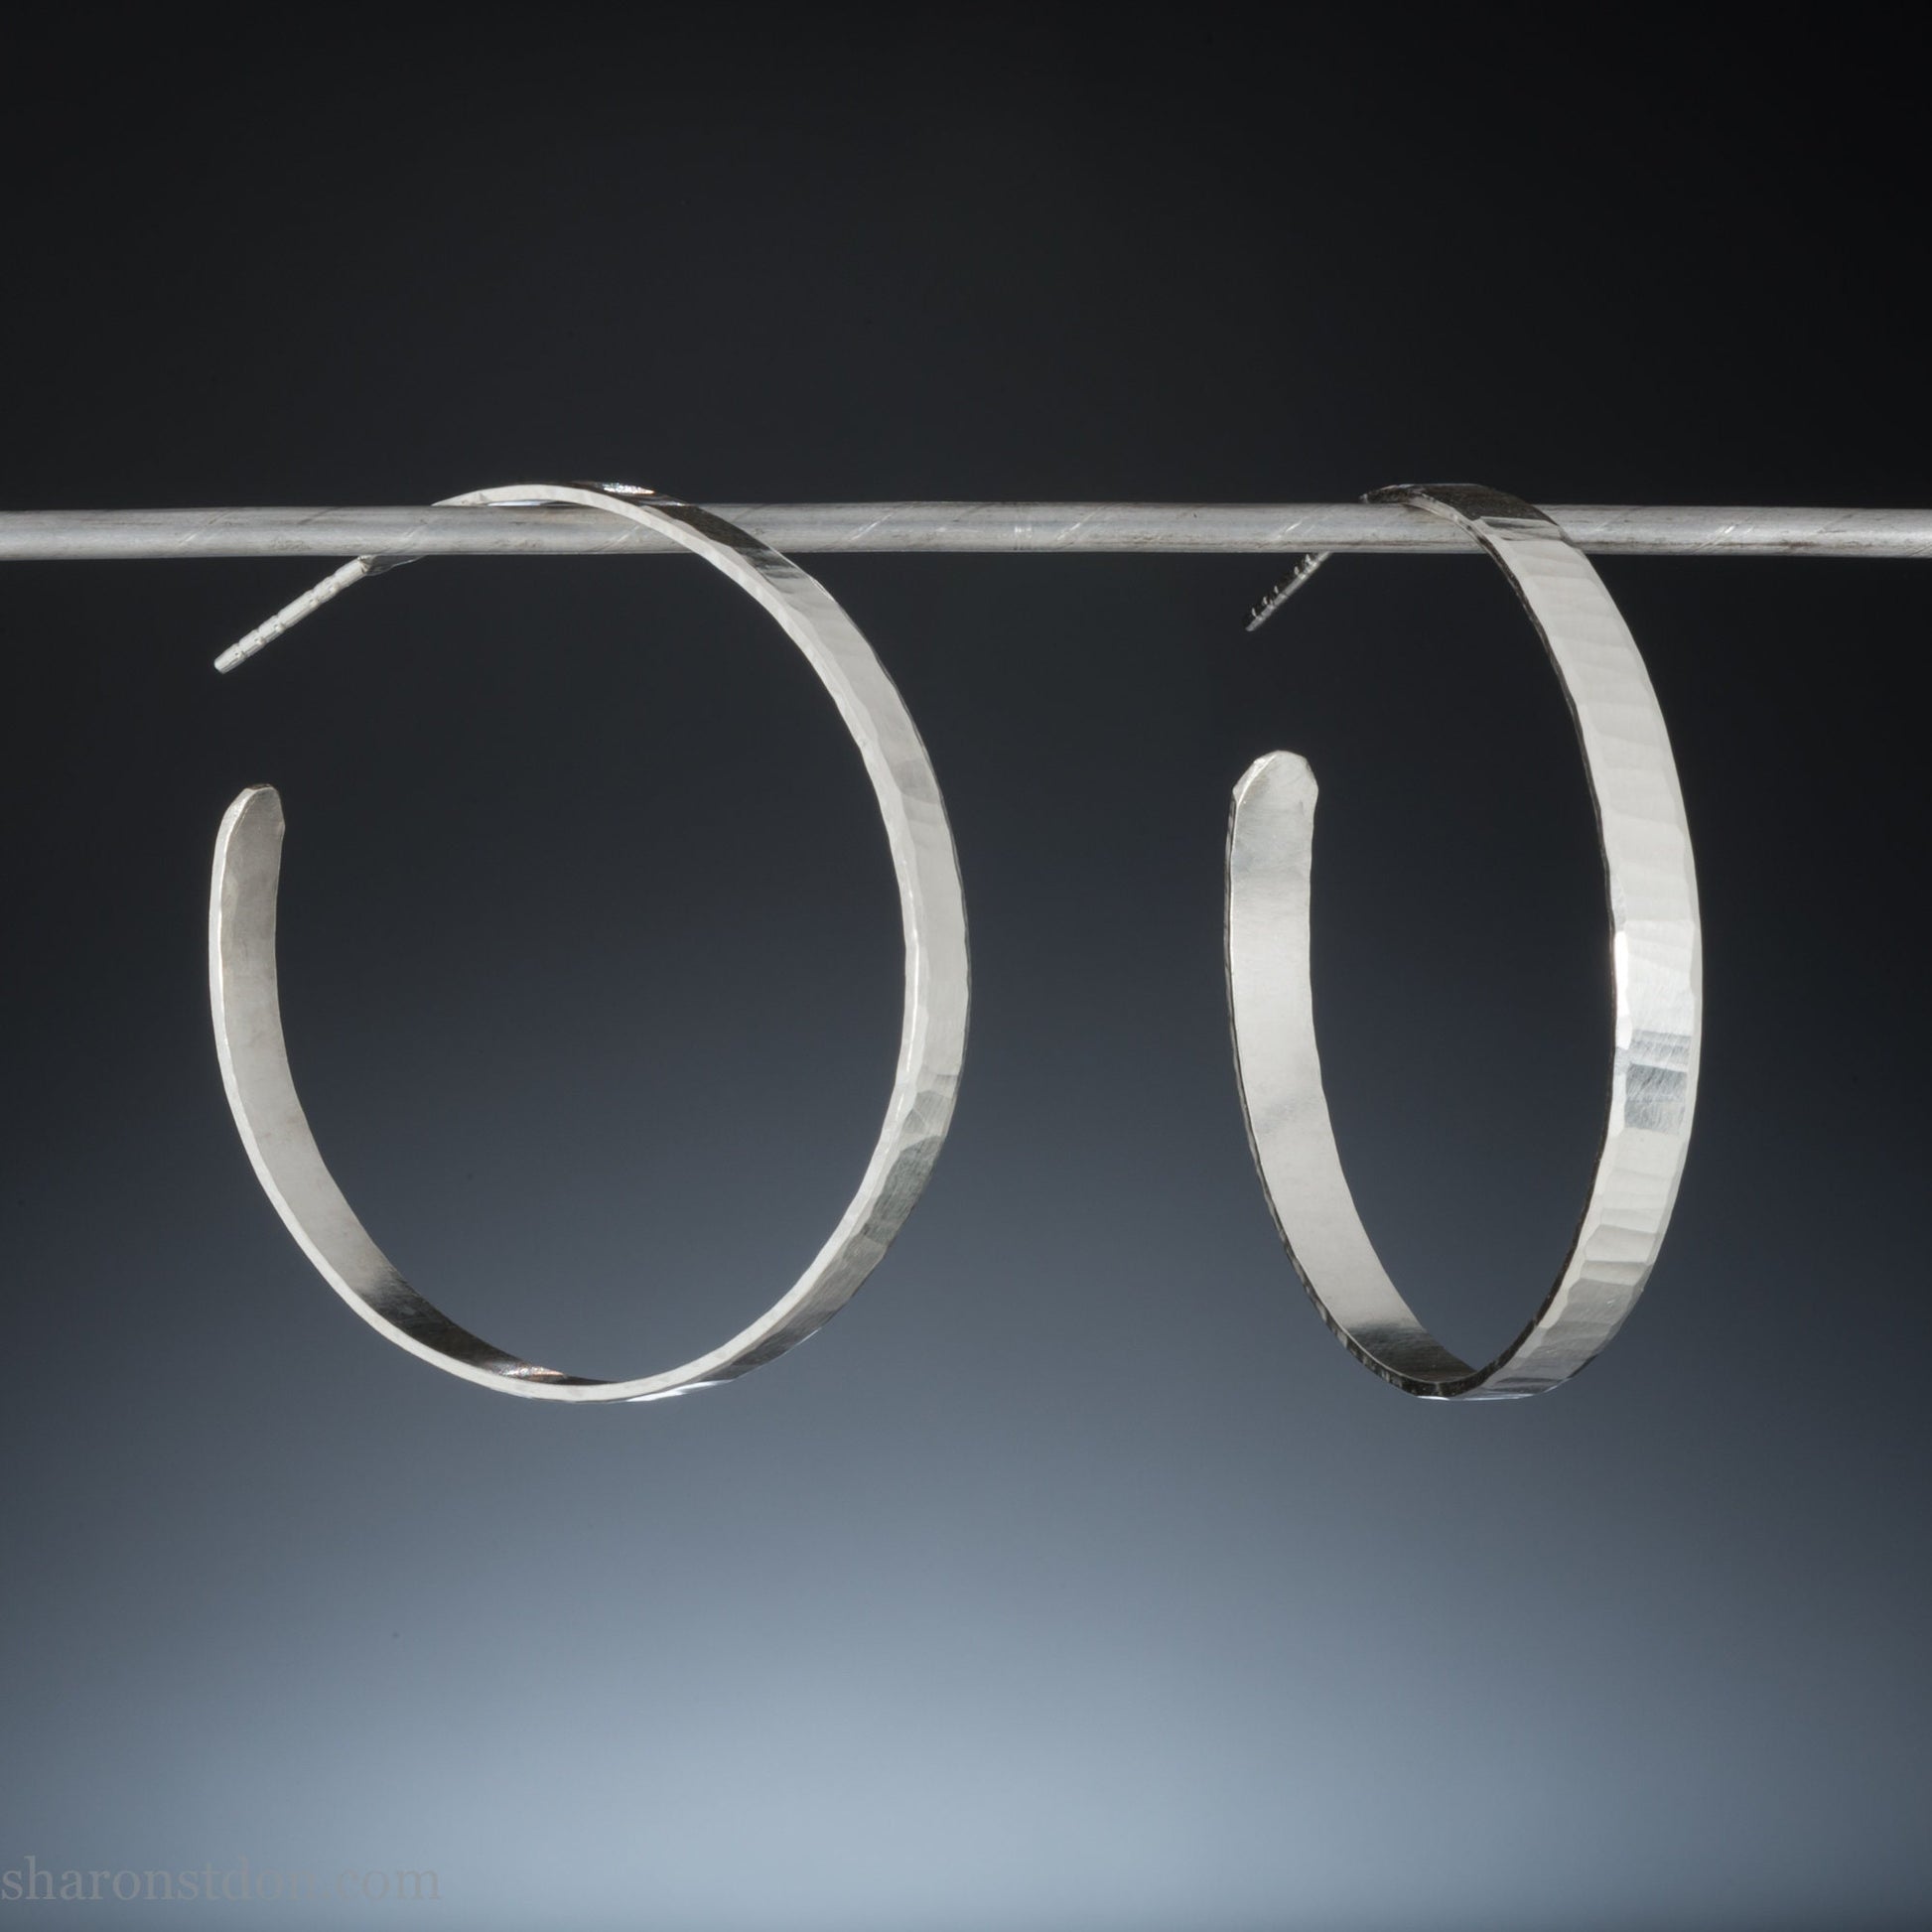 925 handmade sterling silver hoop earrings for women. Comfortable, lightweight, daily wear earrings with a hammered, wavy texture.